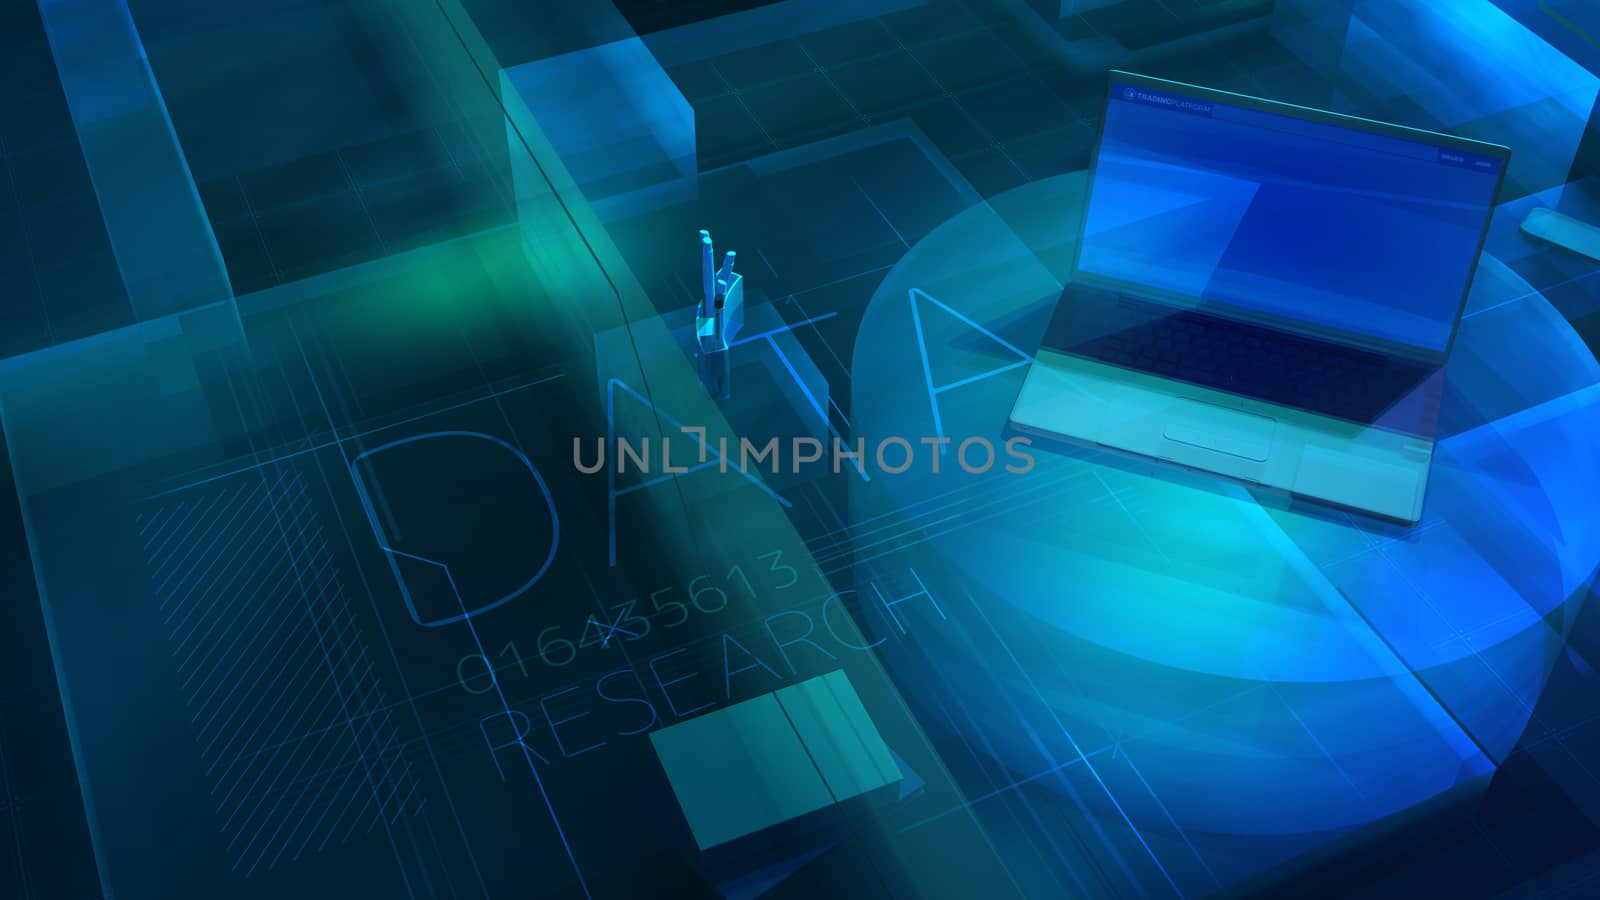 Corporate background in blue with laptop on the theme of Data Research.